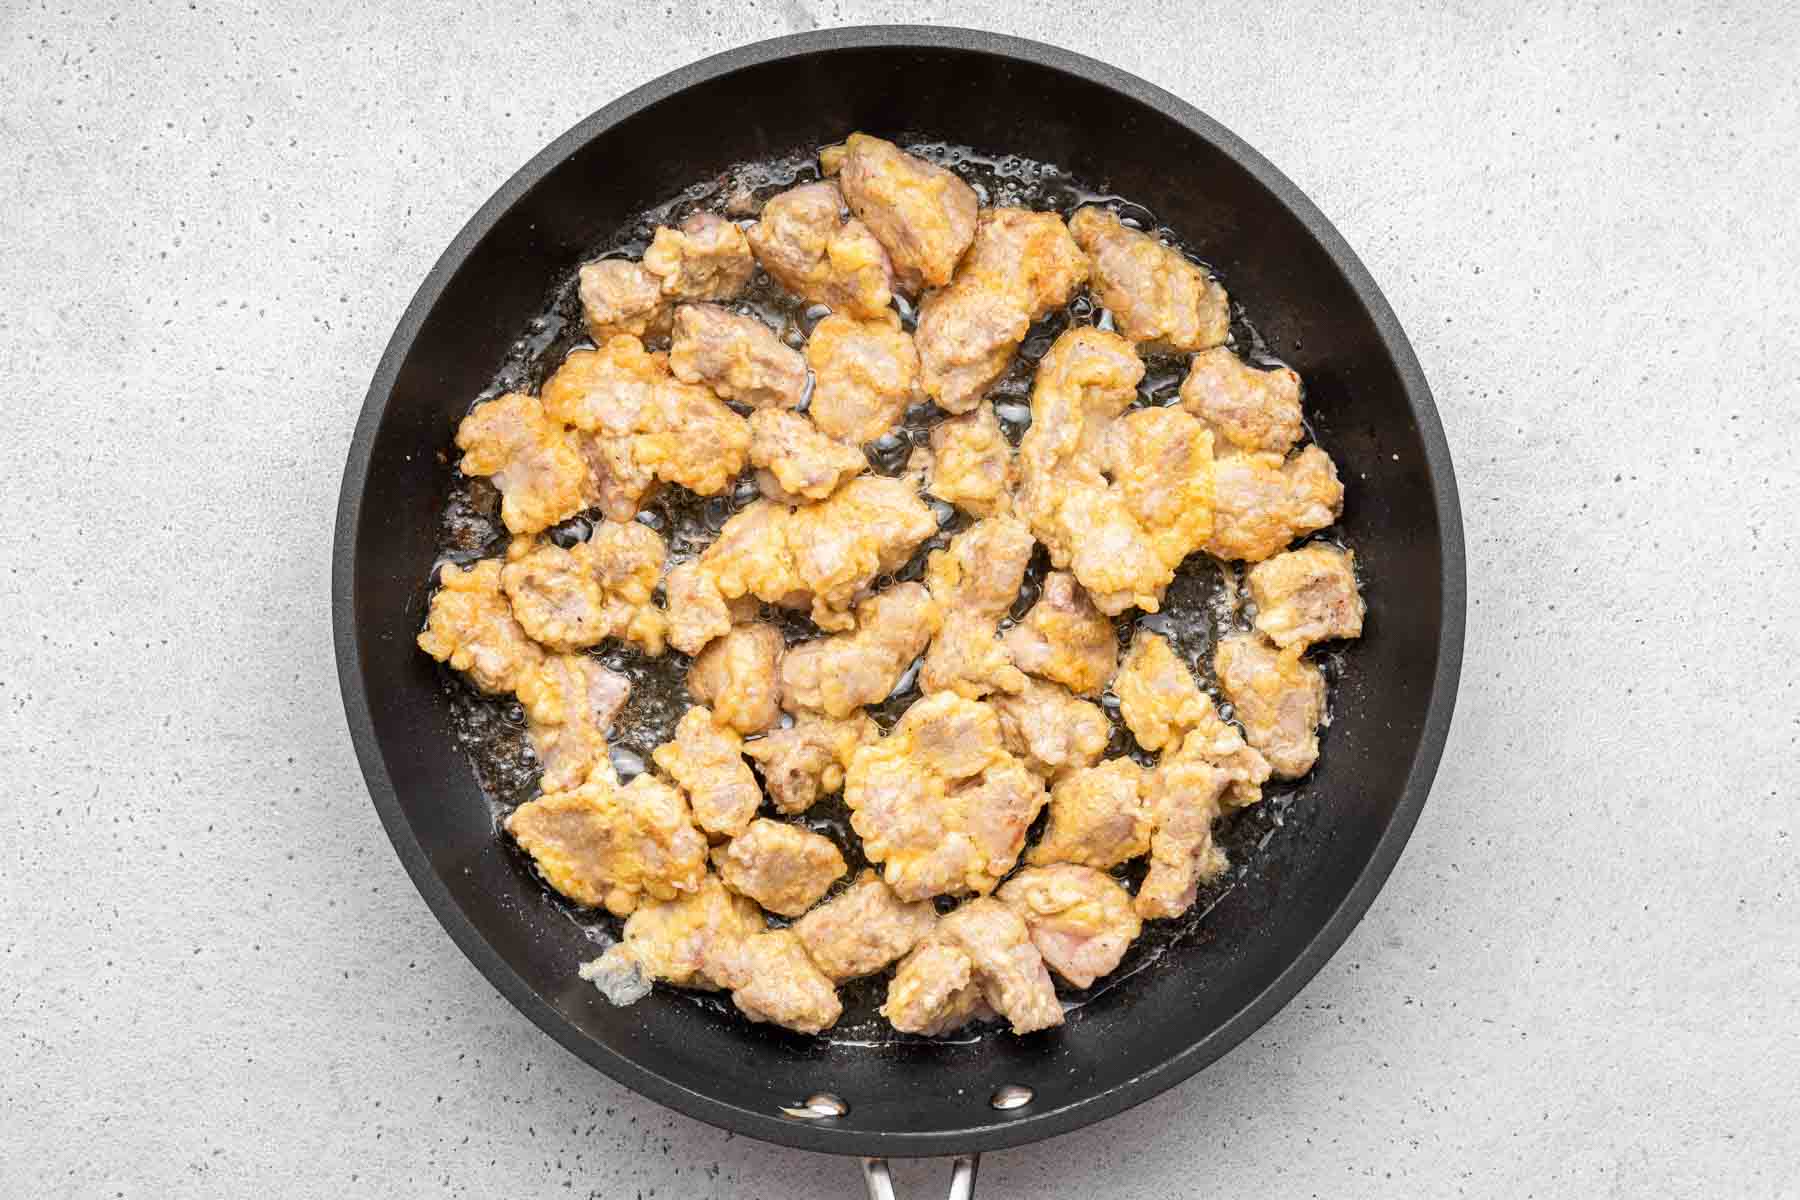 Light brown crusted pieces of meat in a black frying pan.